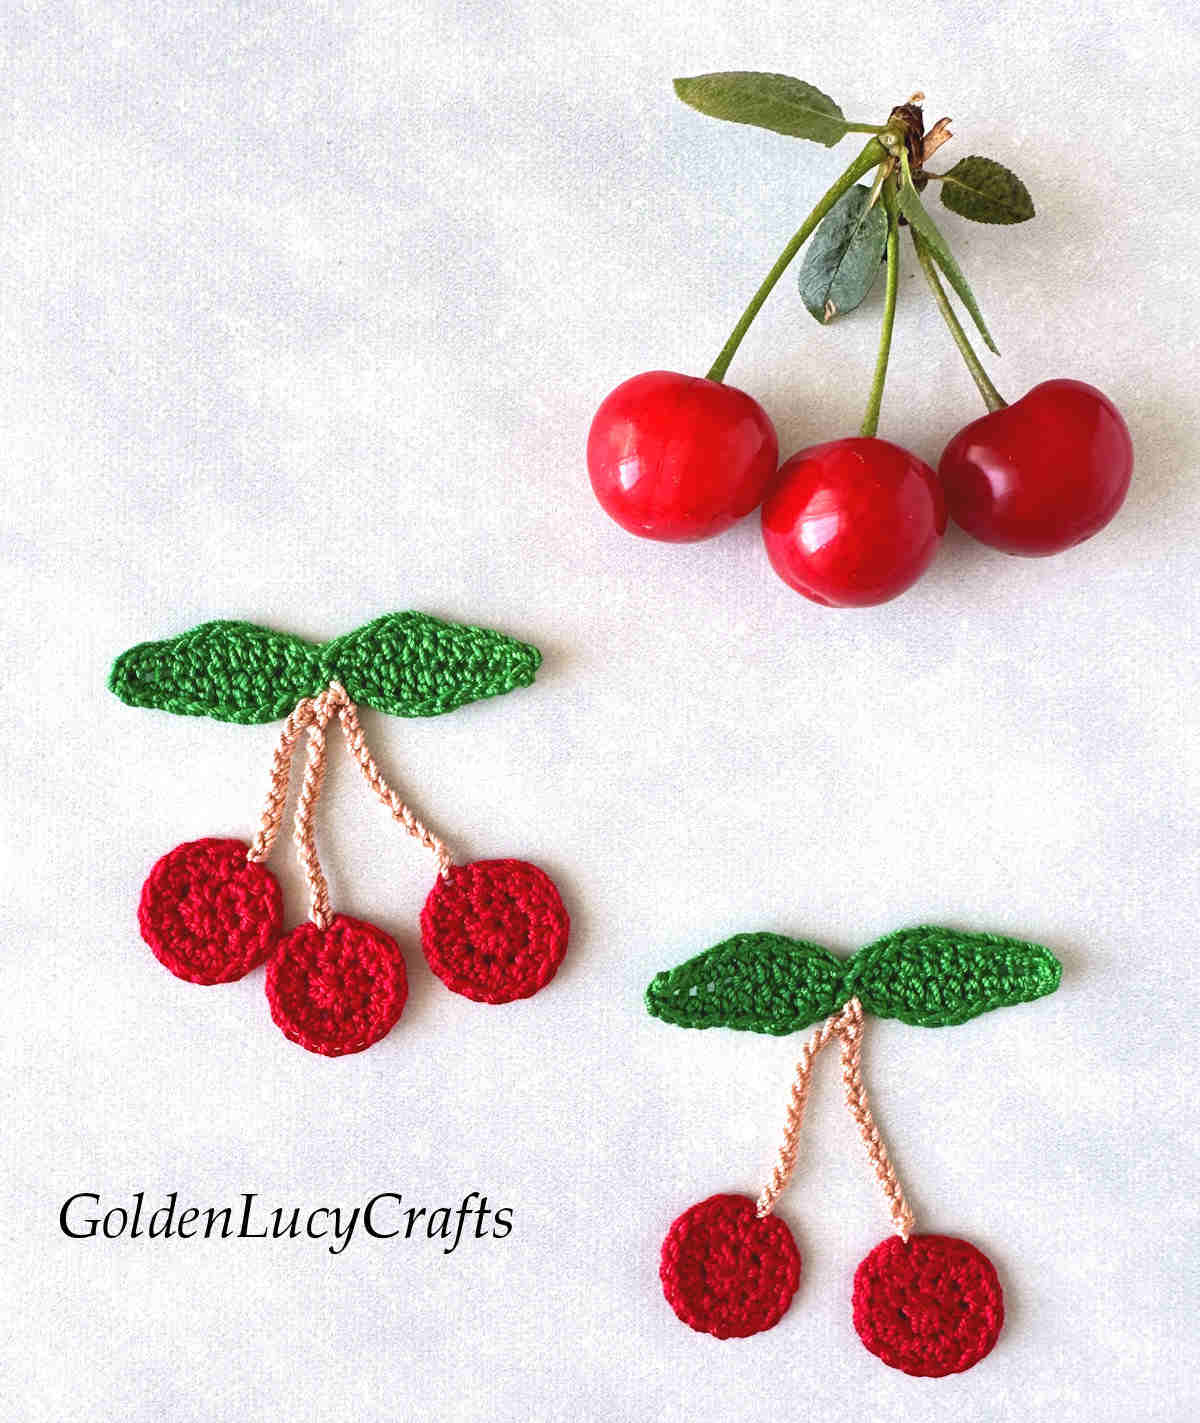 Crochet cherry appliques and three real cherries.